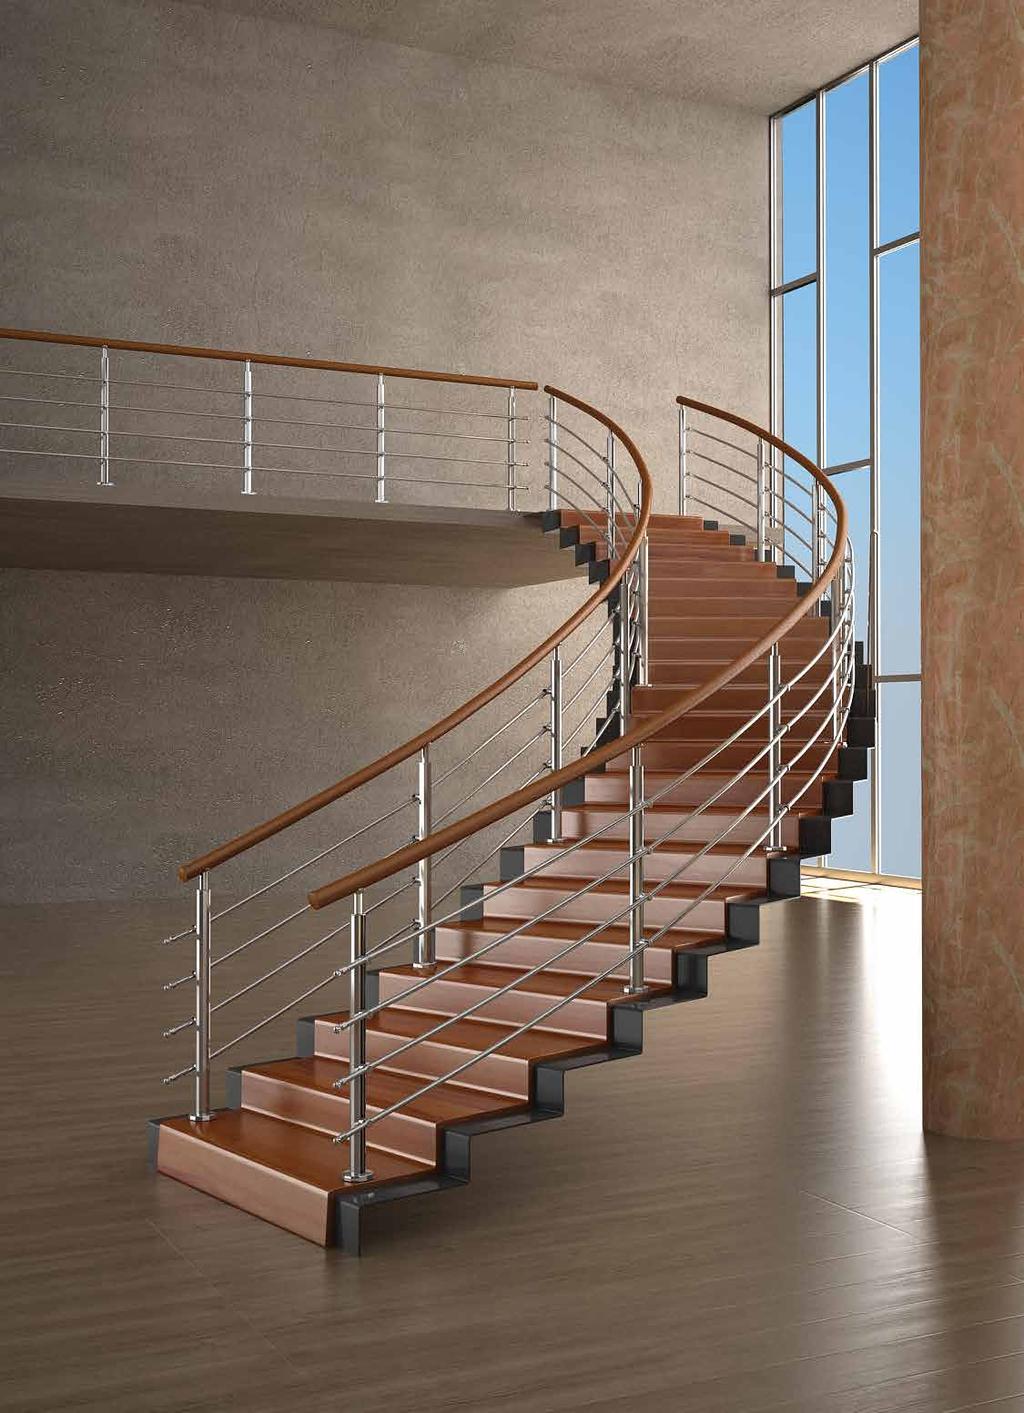 . F50 Railing System is based on an extremely simple design and constructional concept: a tubular system of anodized or polyester powder coated aluminum, which is elaborately